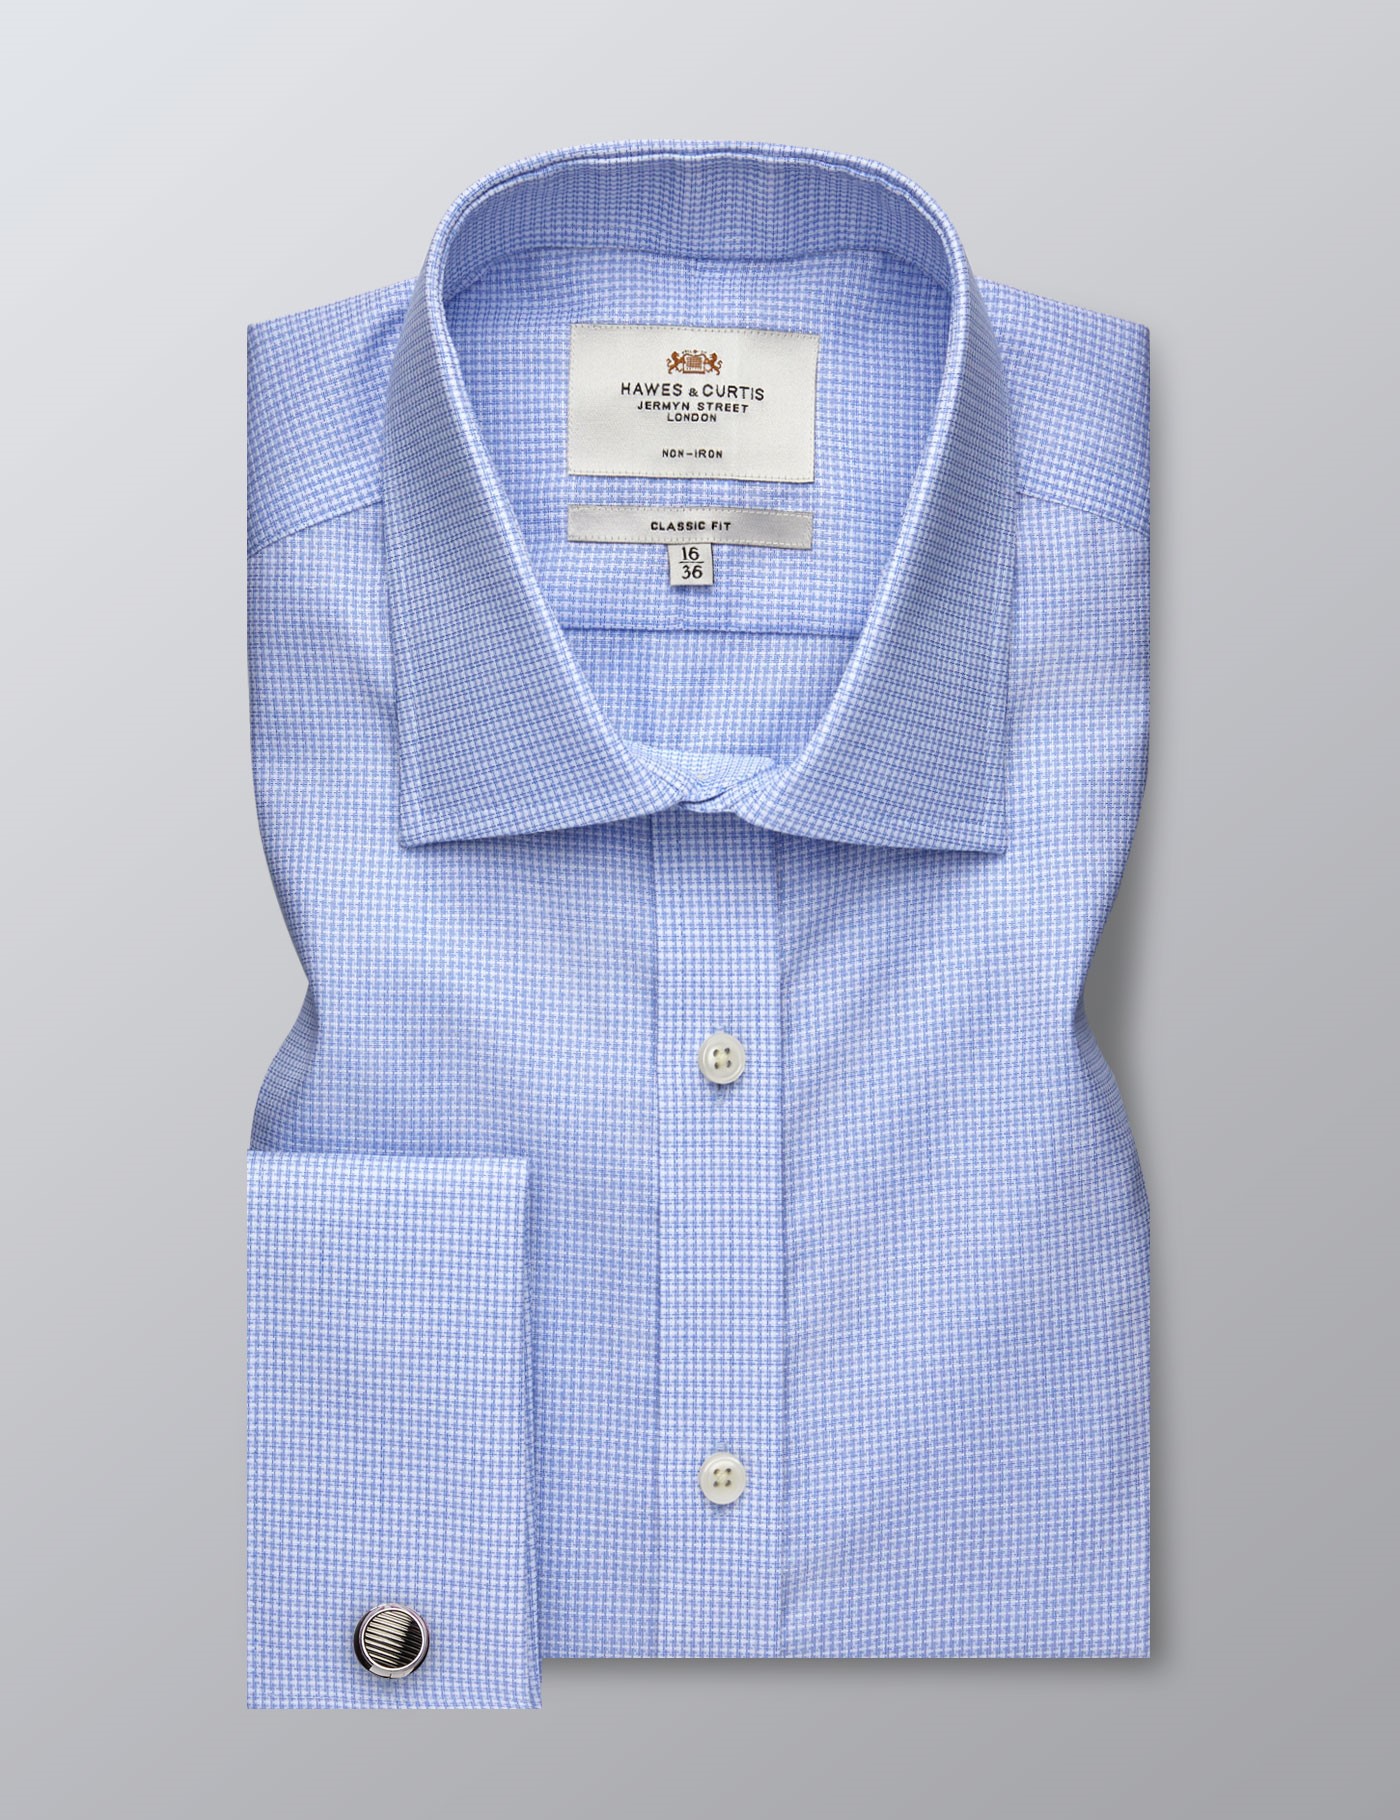 Men's Formal Blue & White Classic Fit Shirt - Double Cuff - Non Iron ...